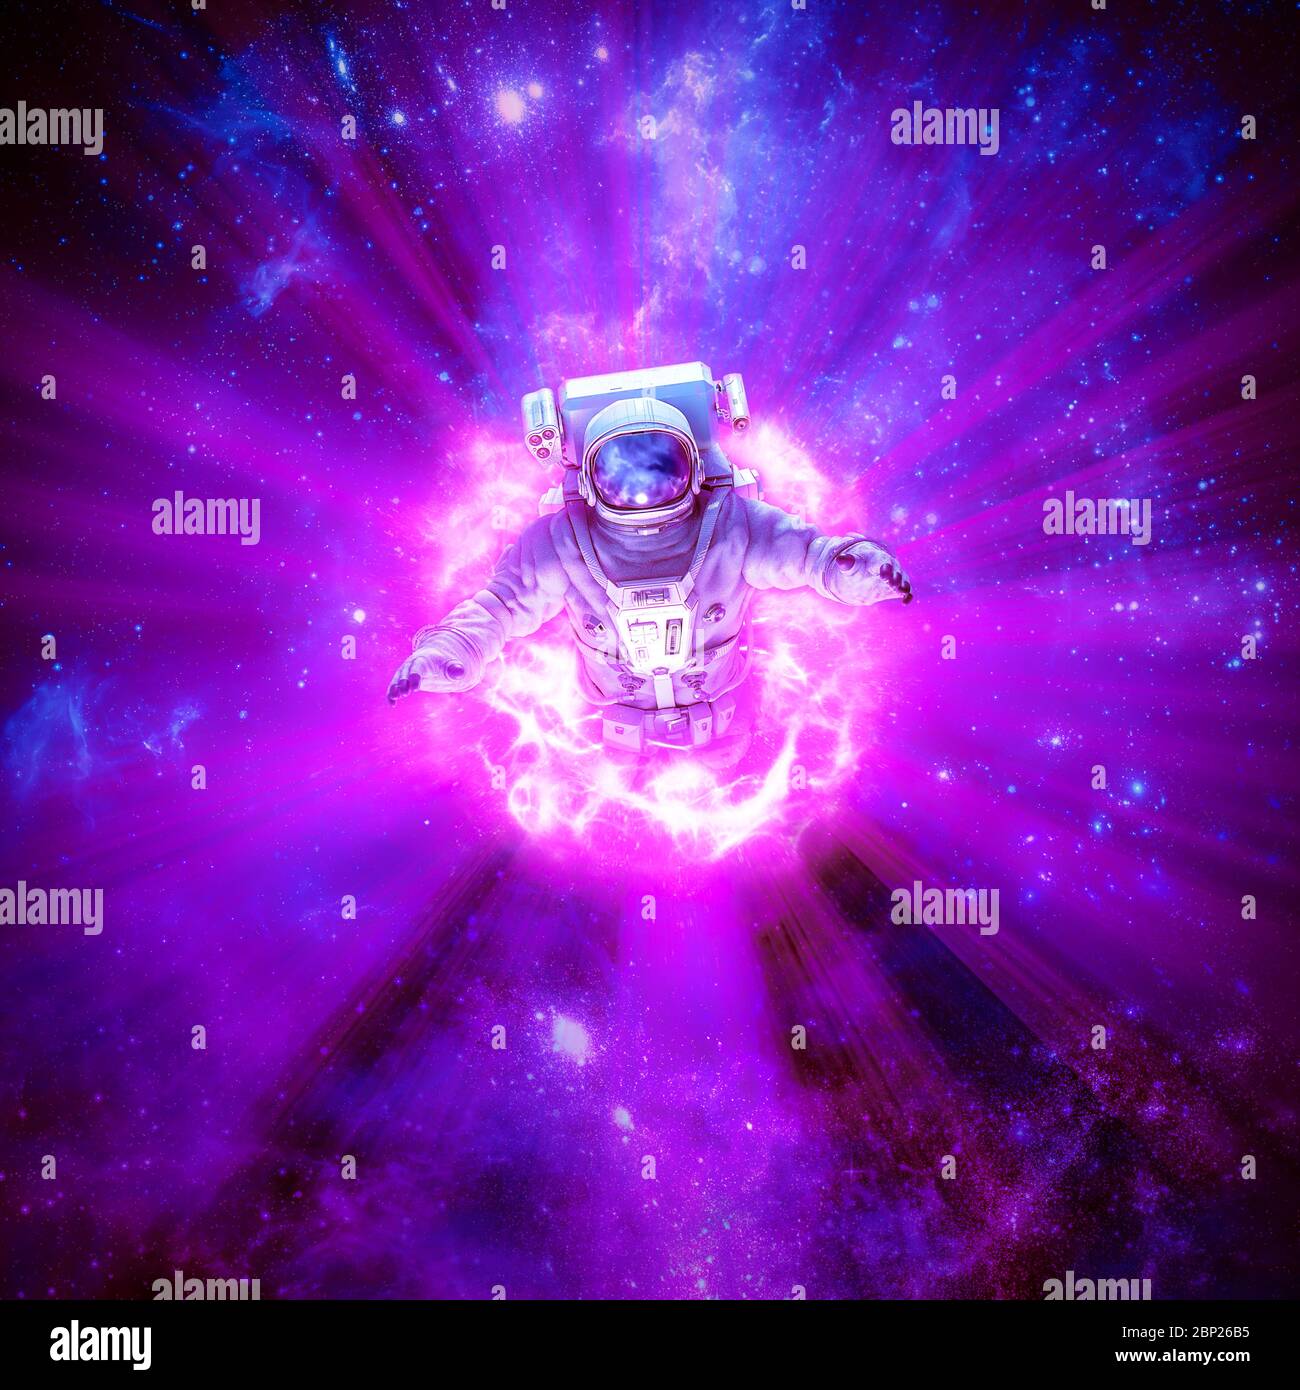 Galactic wormhole exploration / 3D illustration of science fiction scene with astronaut passing through glowing energy portal in outer space Stock Photo